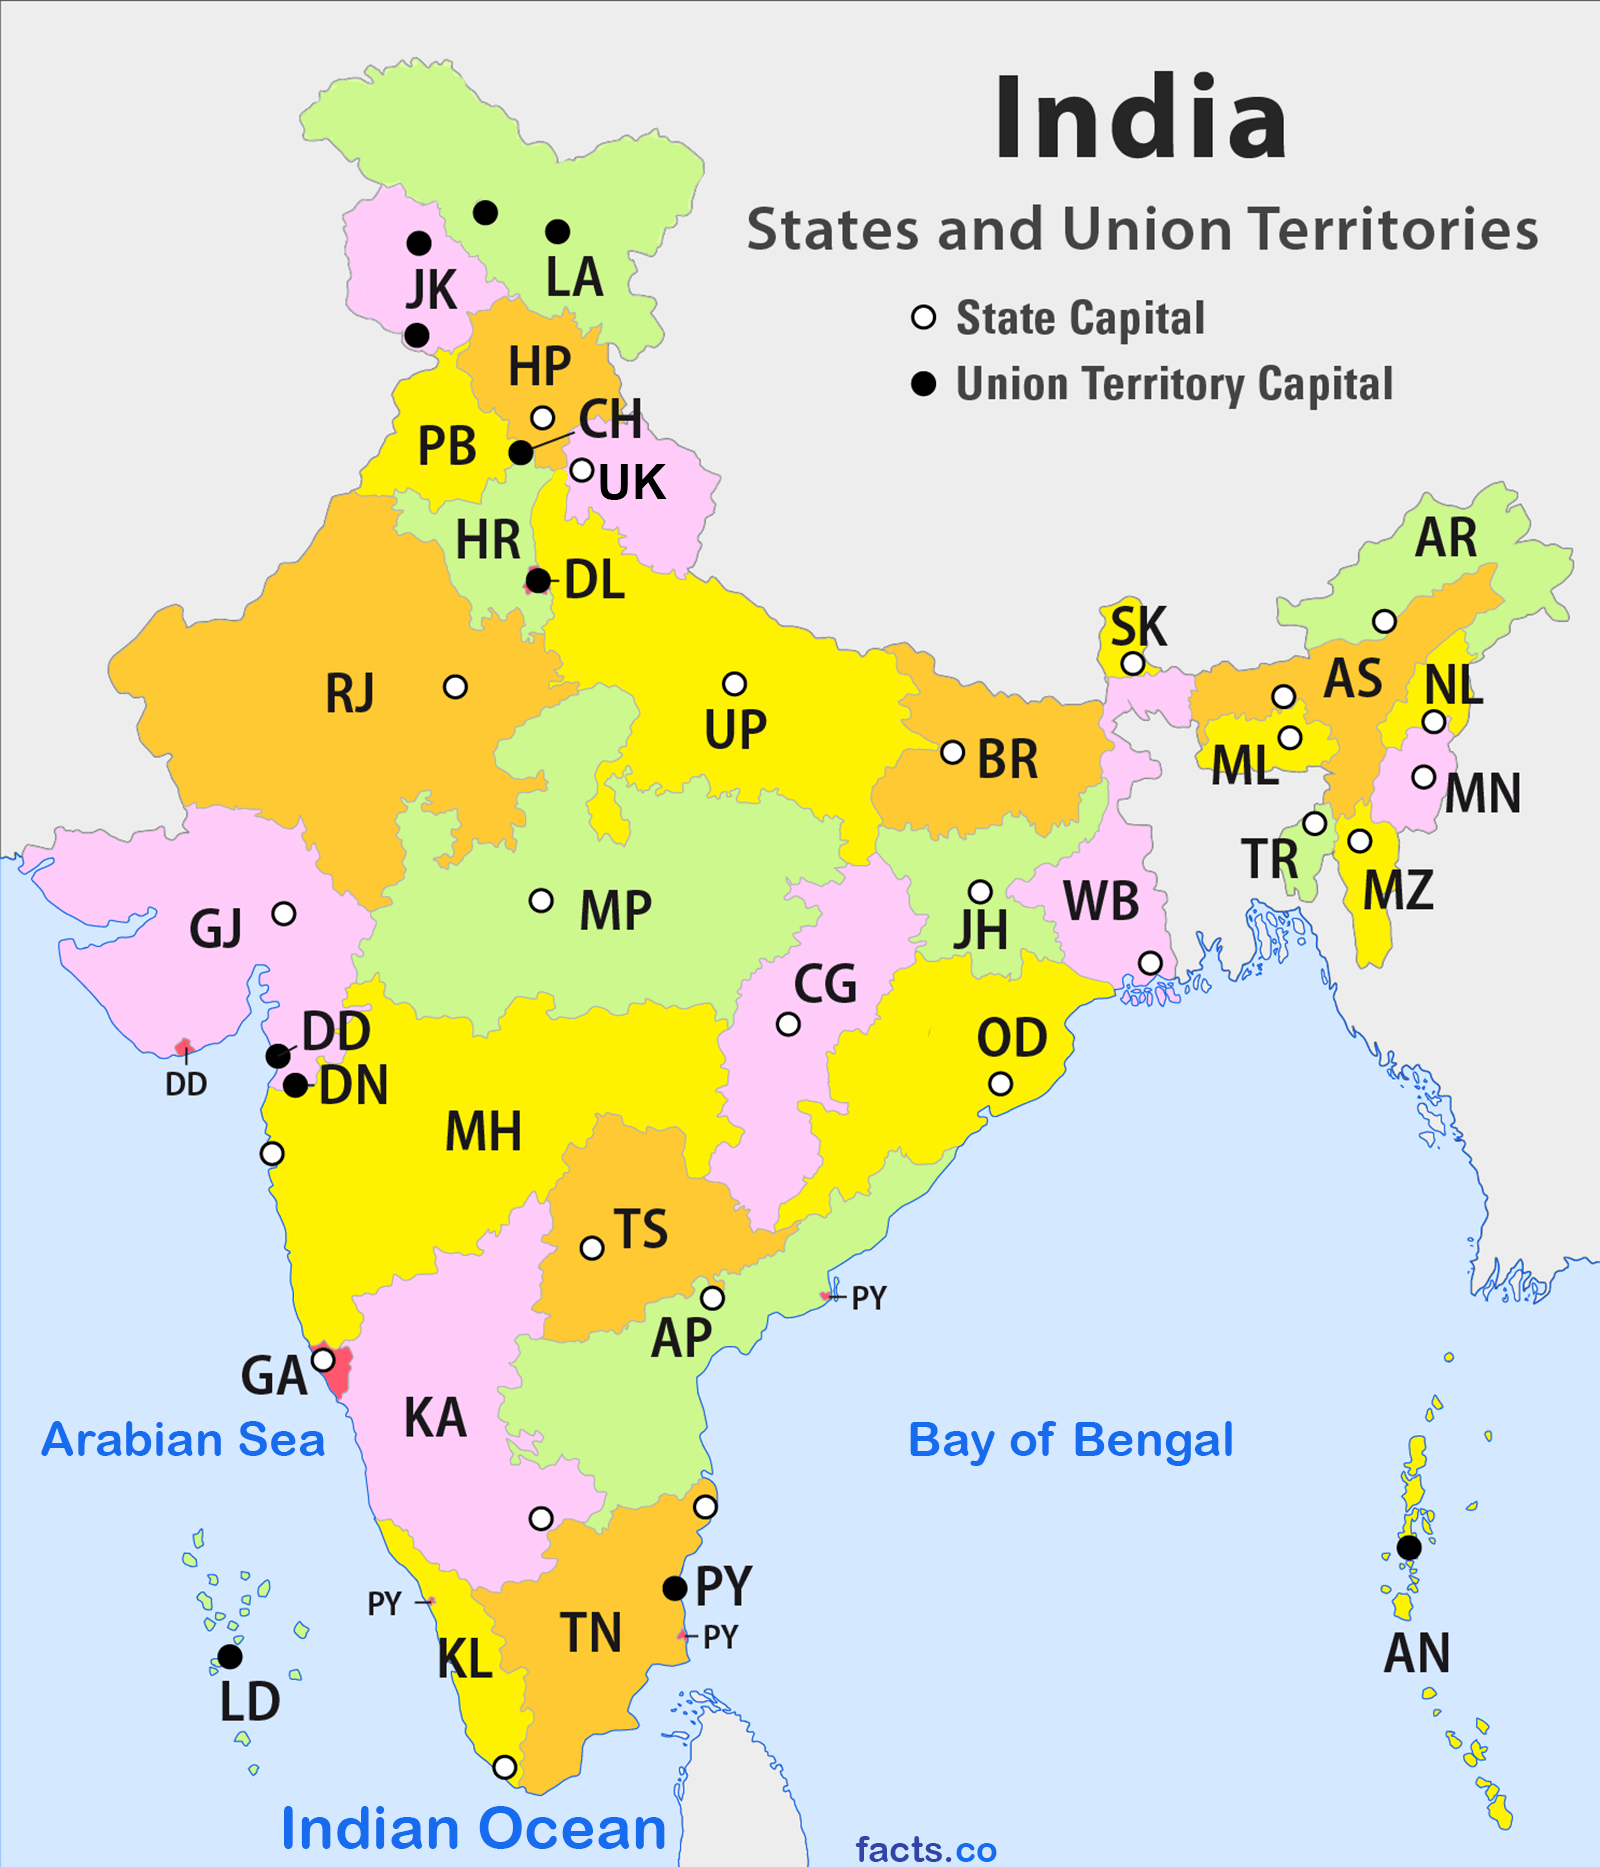 Vehicle Registration Codes in India